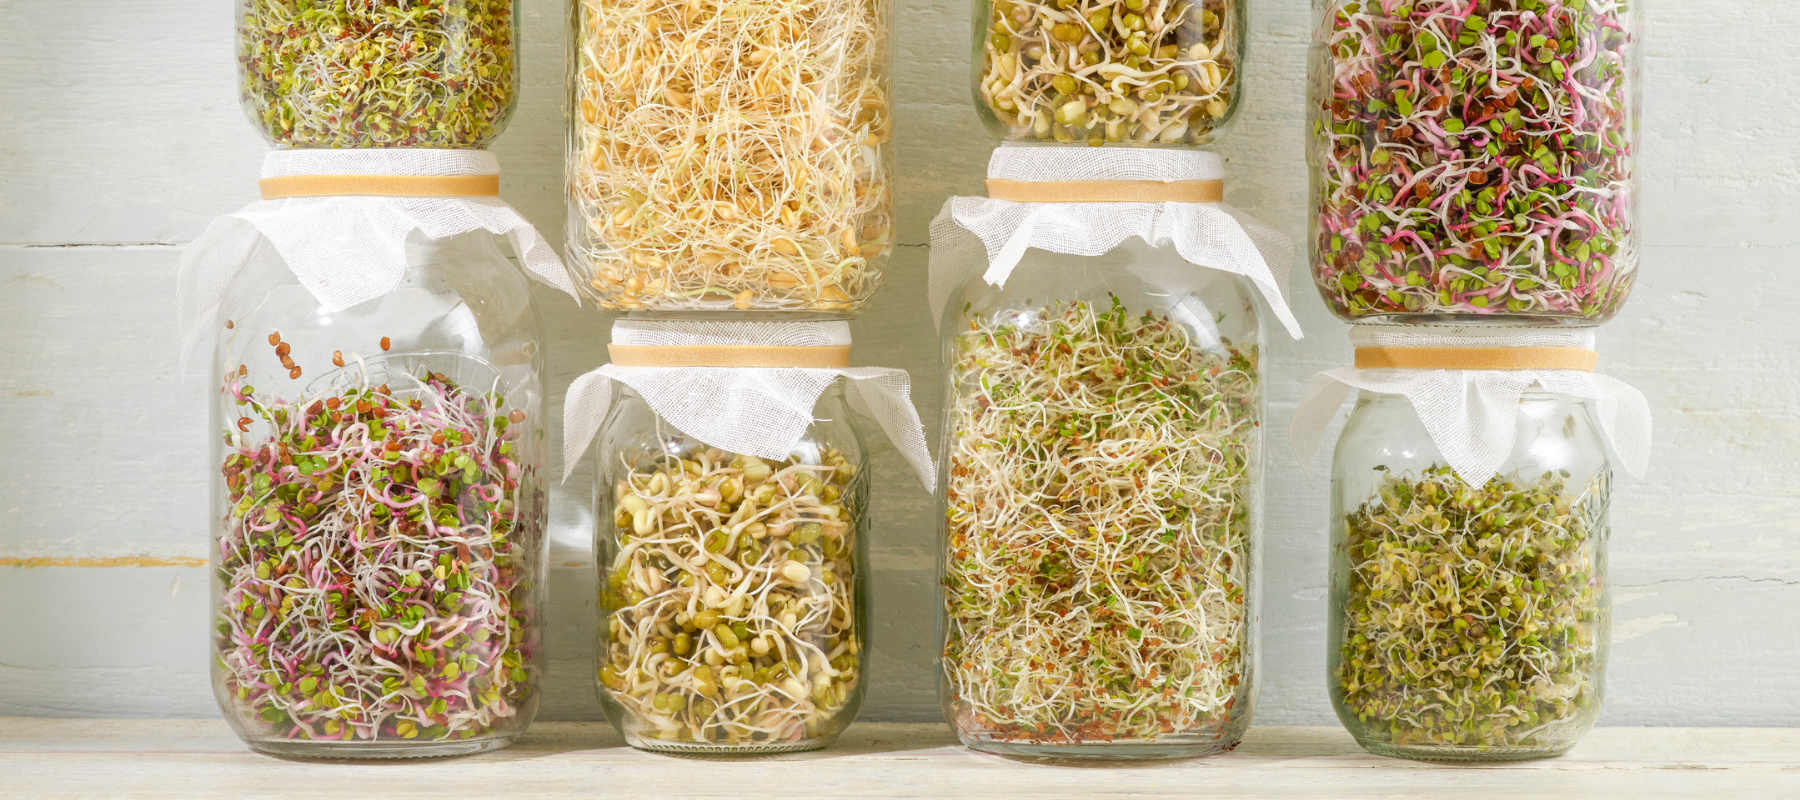 How to Grow Sprouts